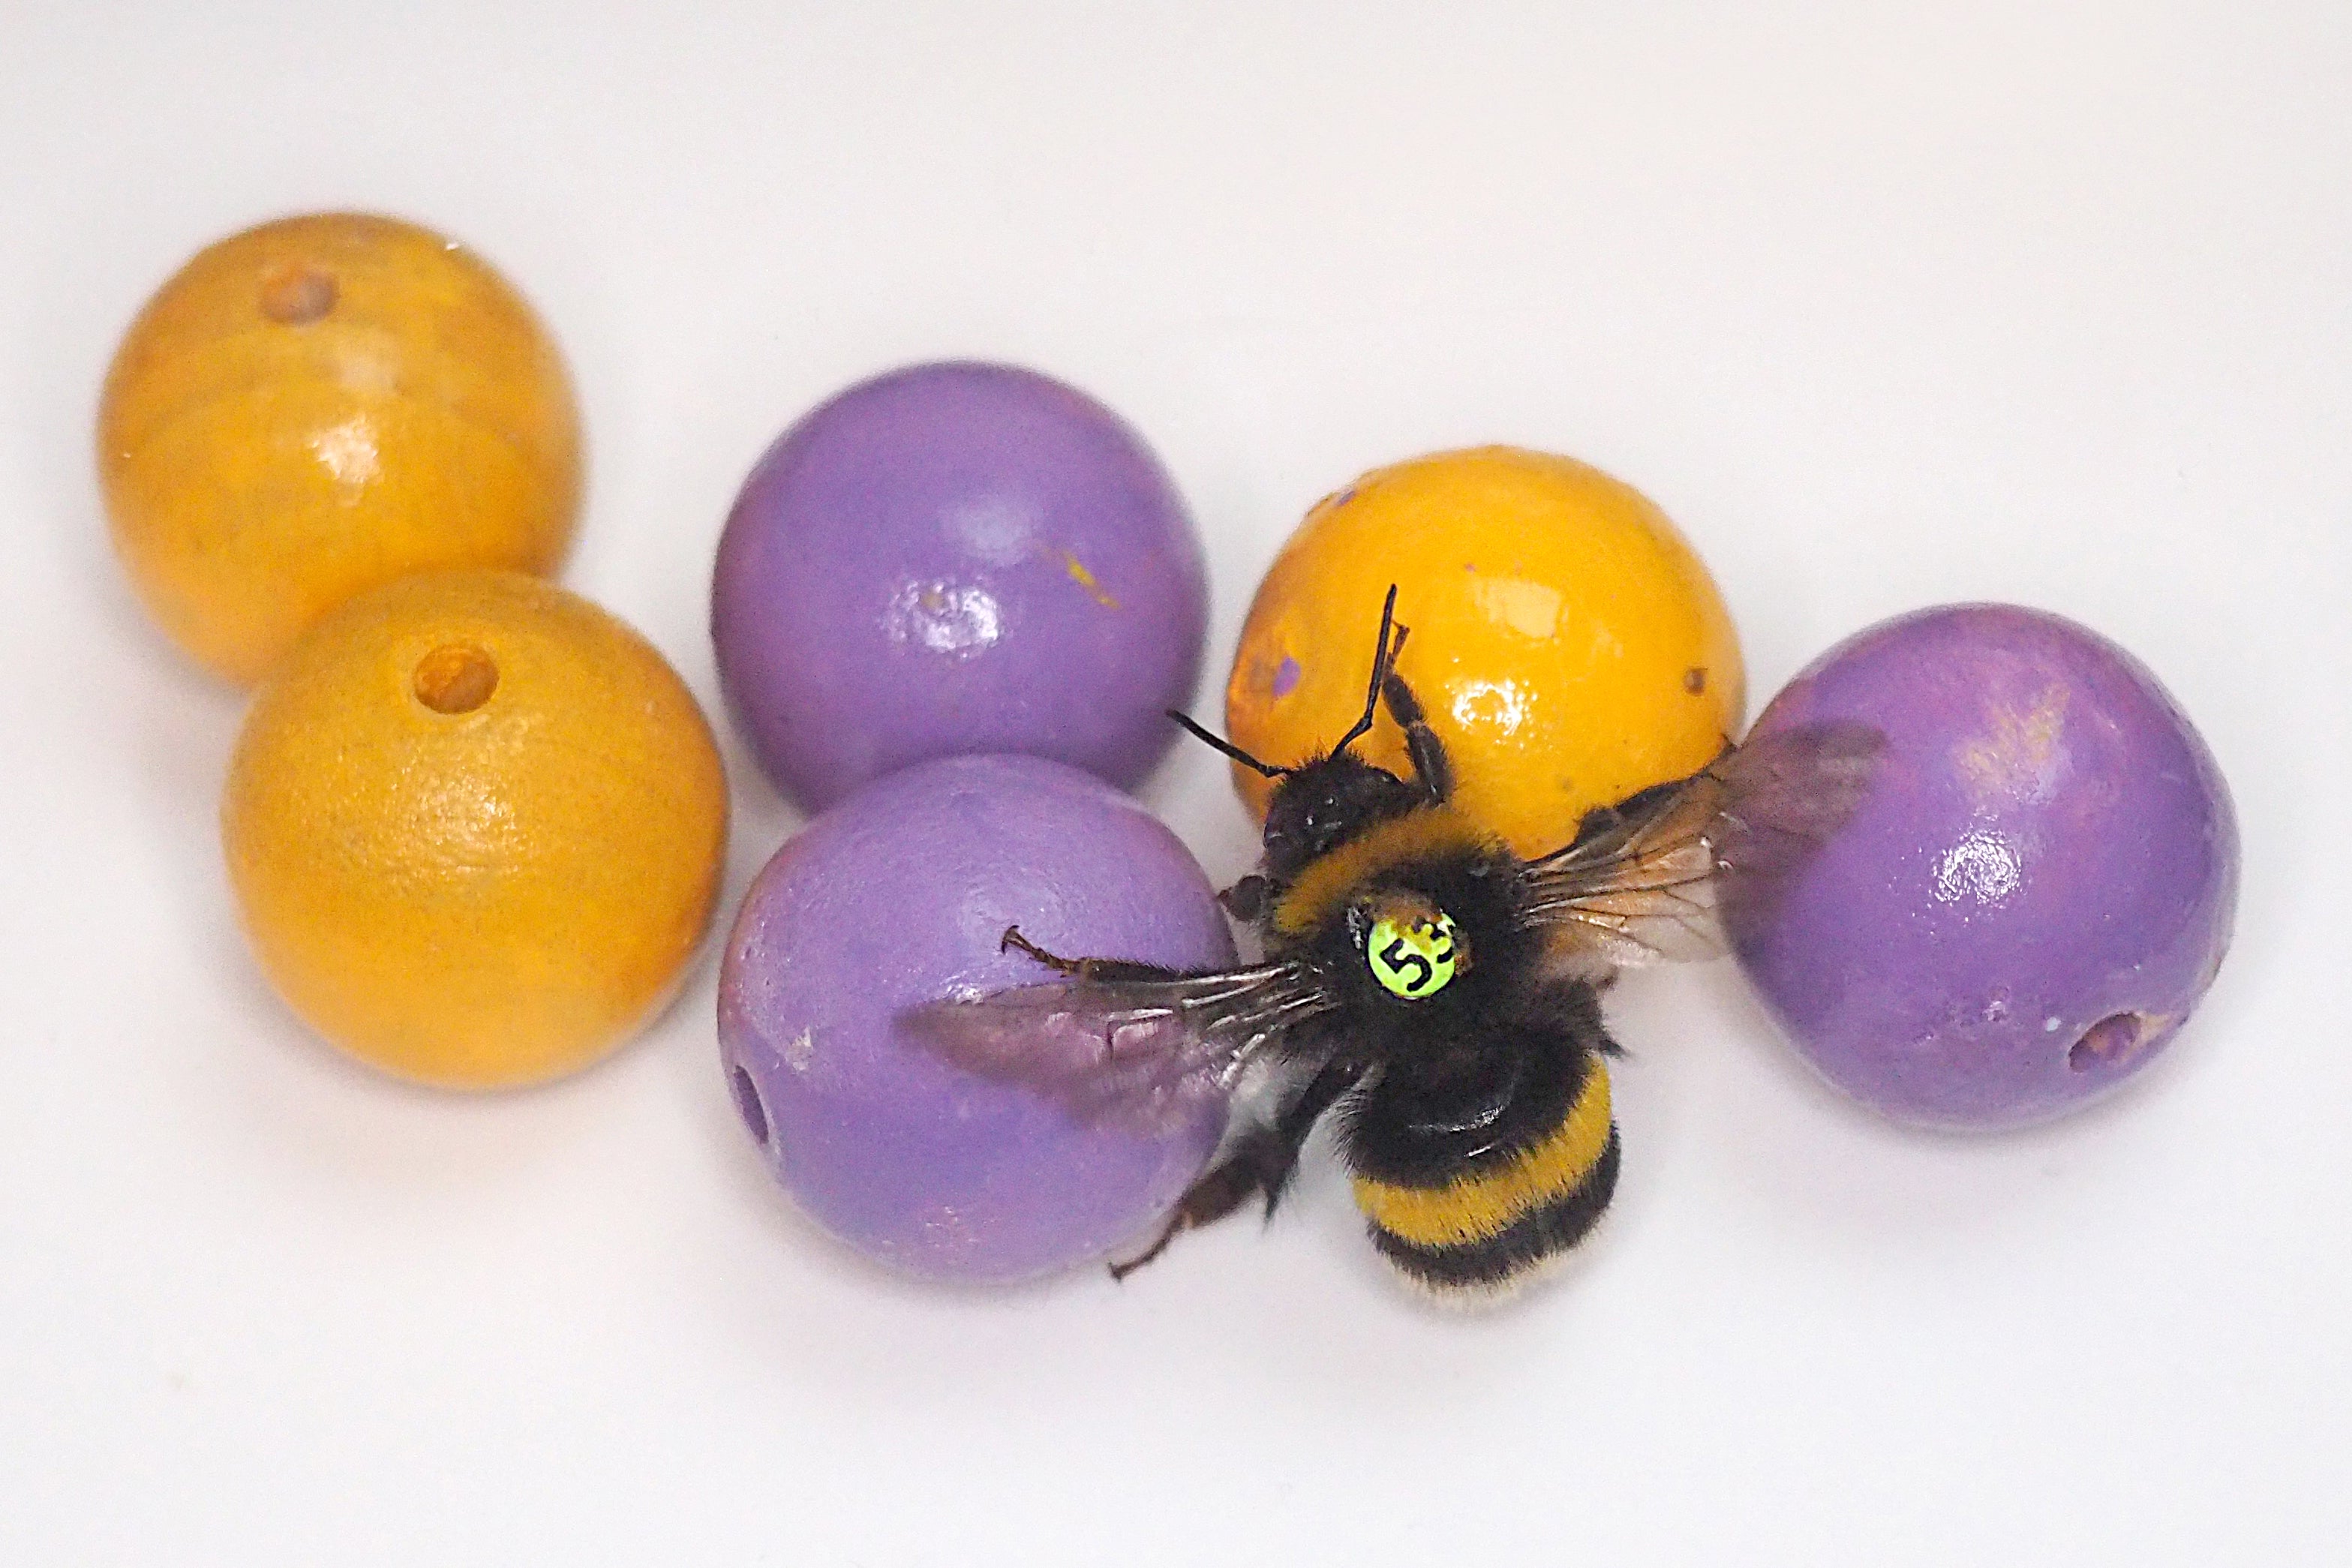 Ball-Rolling Bumble Bees Just Wanna Have Fun - Scientific American